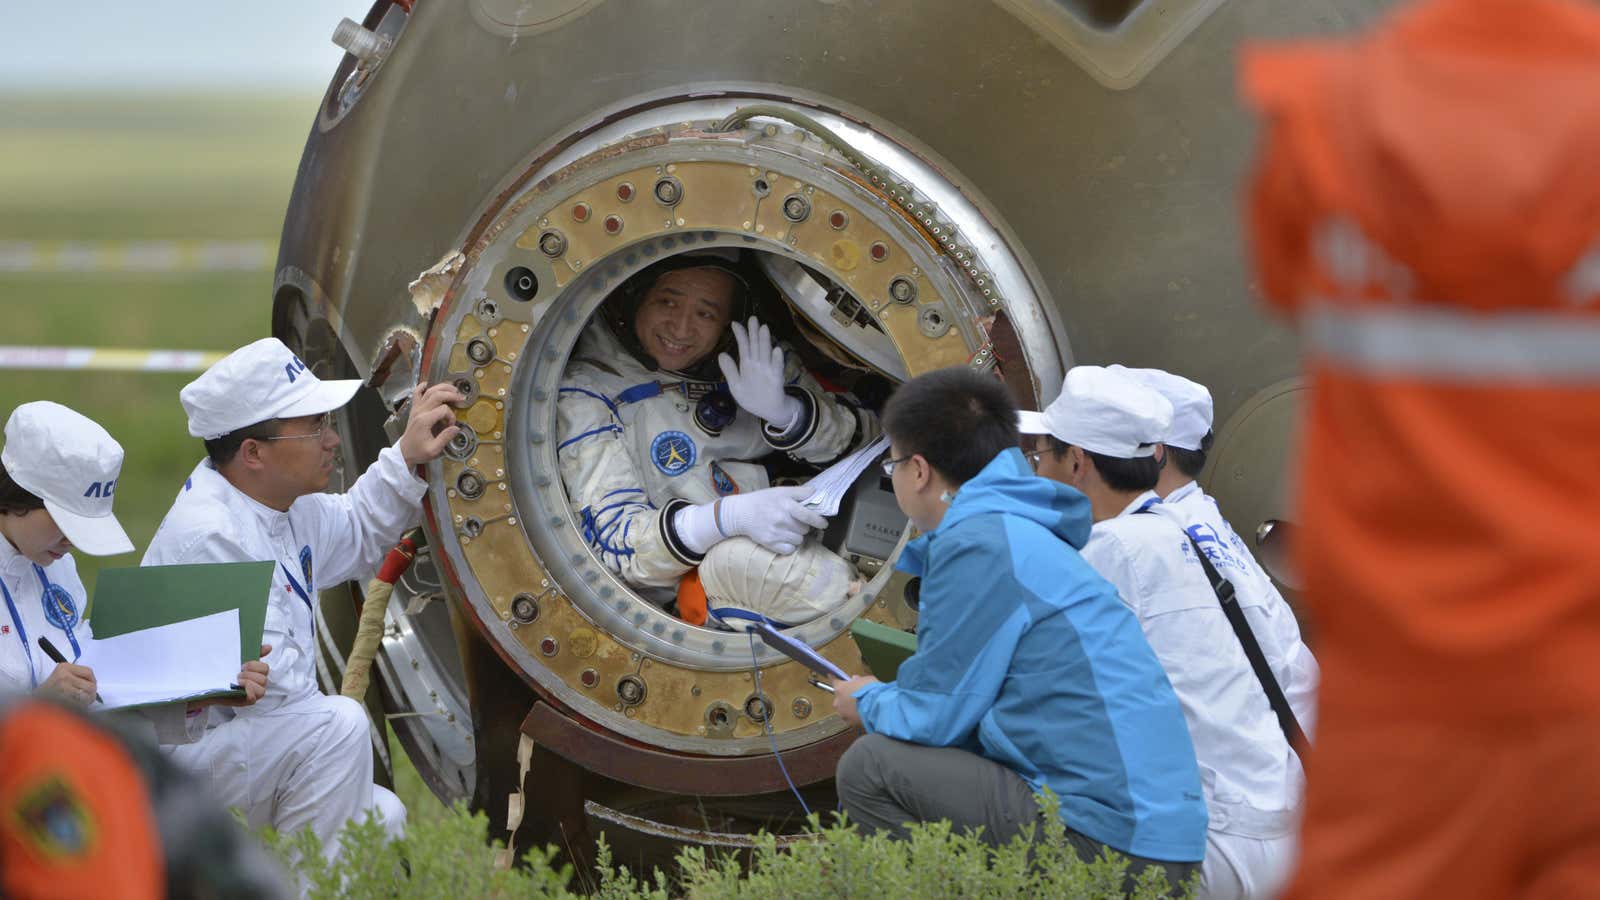 Though China’s science spending is taking off, its innovation is still stuck on the ground.